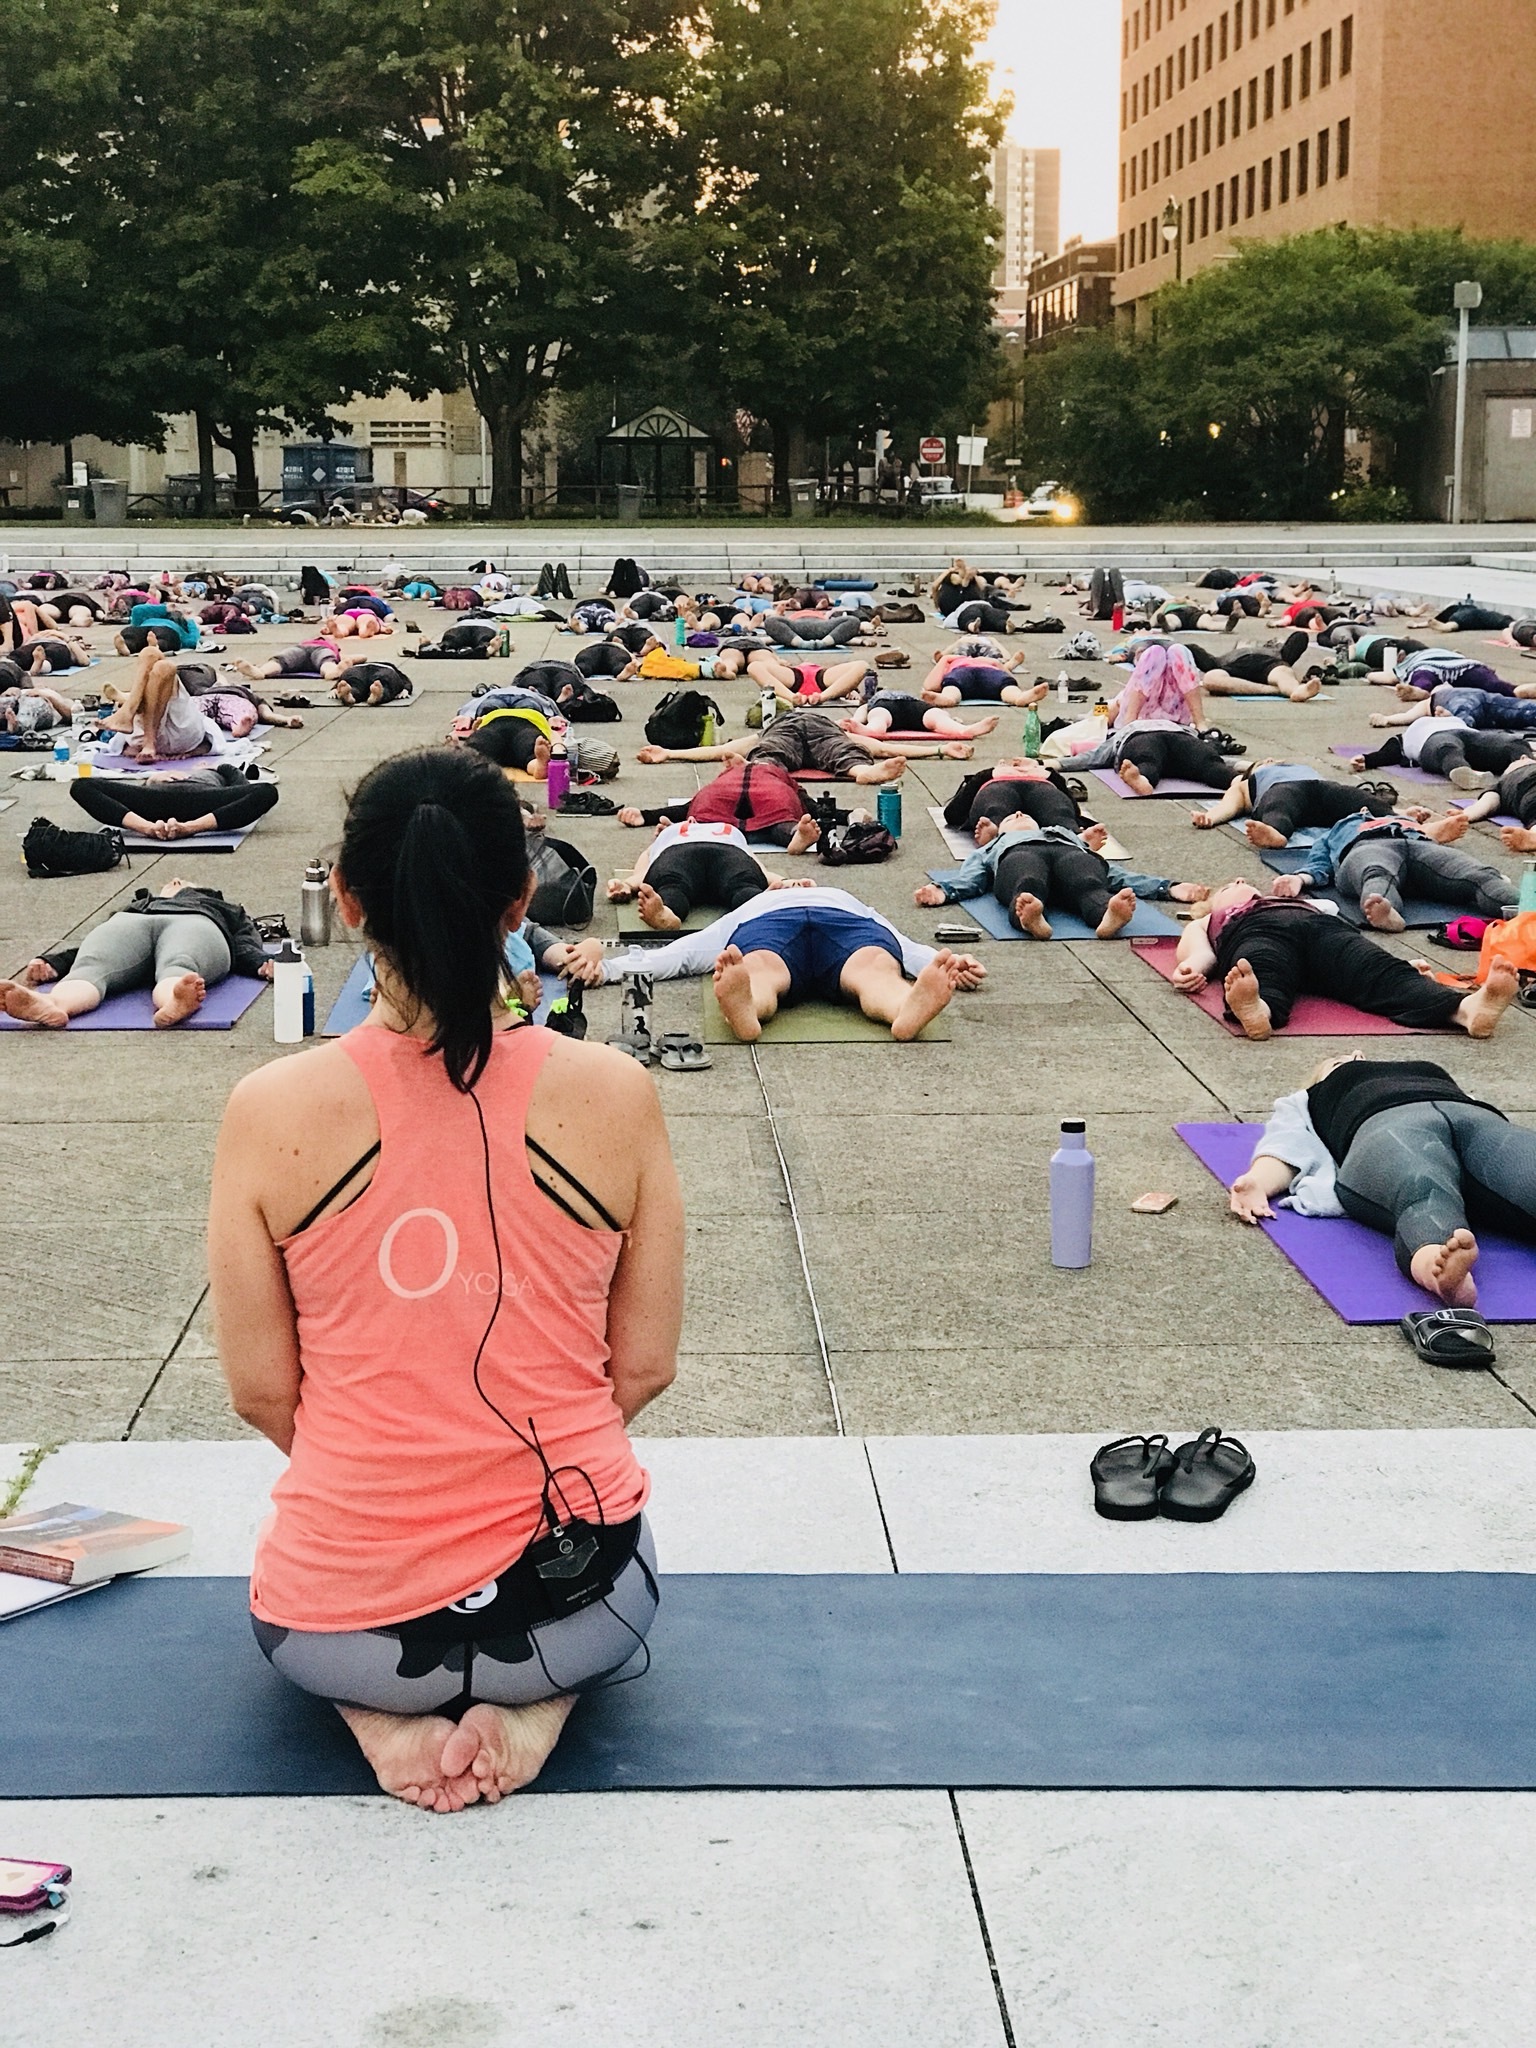 Tiffany Cagwin leading an outdoor yoga session in a city